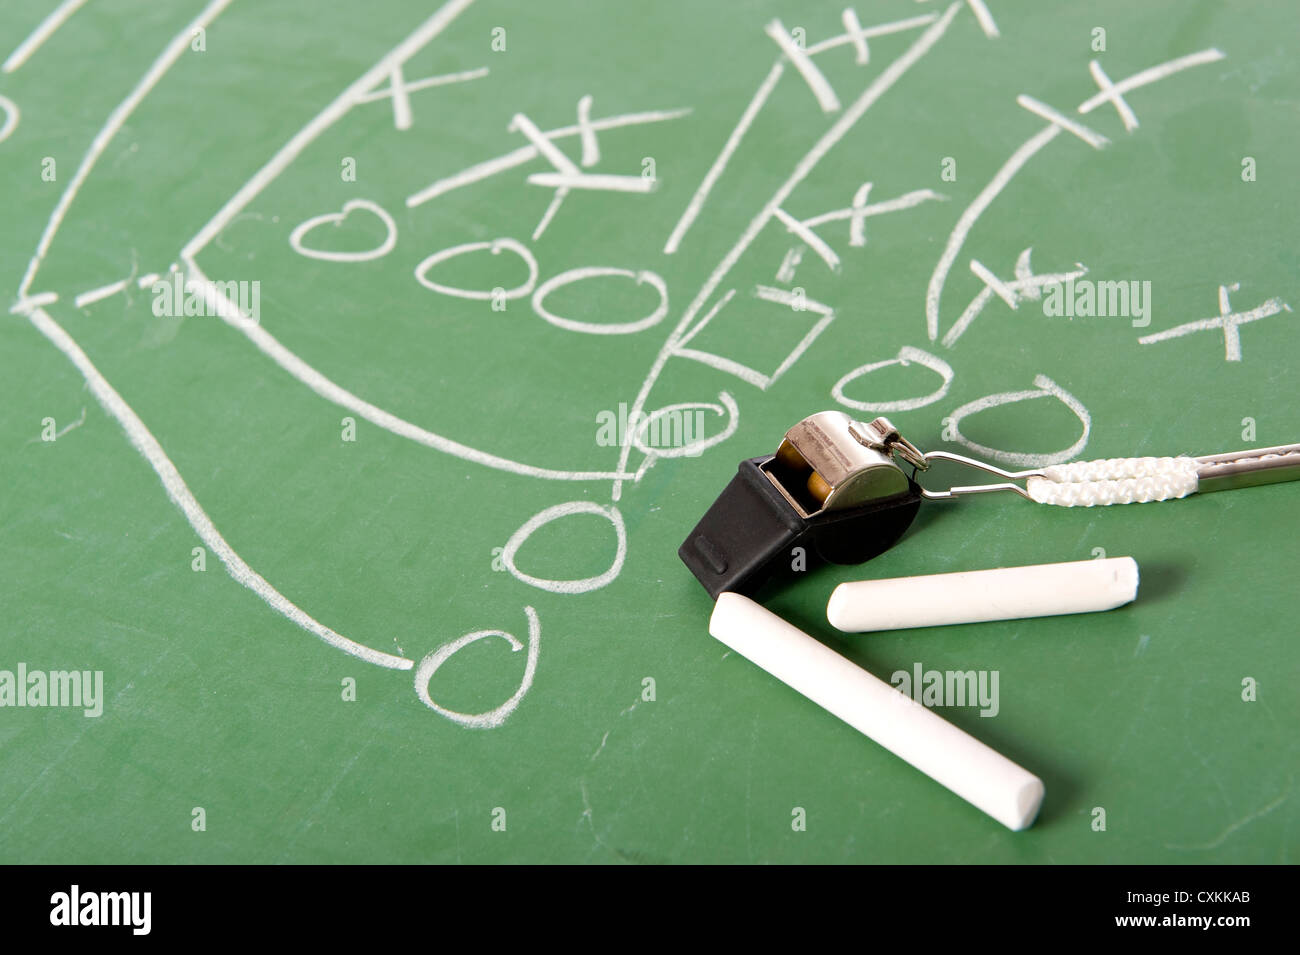 A football play diagram drawn with chalk on a challkboard with chalk and a whistle Stock Photo